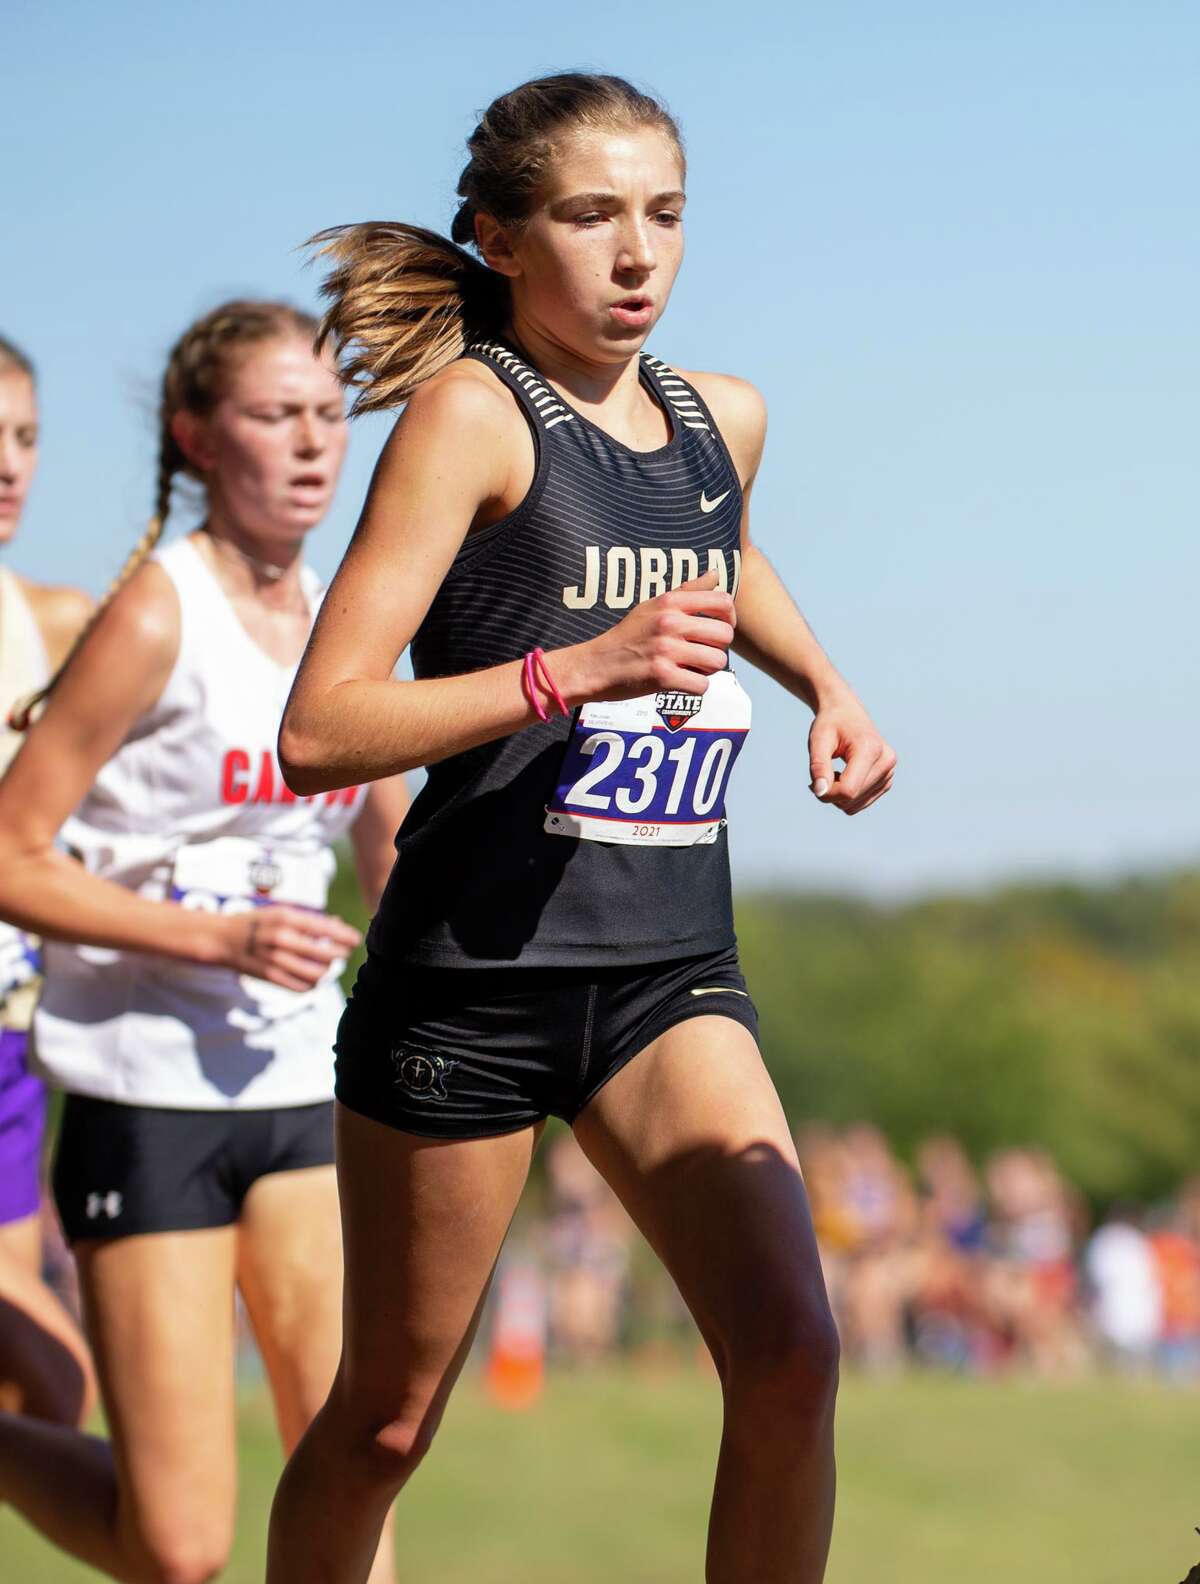 Addison Sutton of Katy Jordan (2310) runs in the girls Class 5A state cross country meet on November 5, 2021 in Round Rock, Texas.